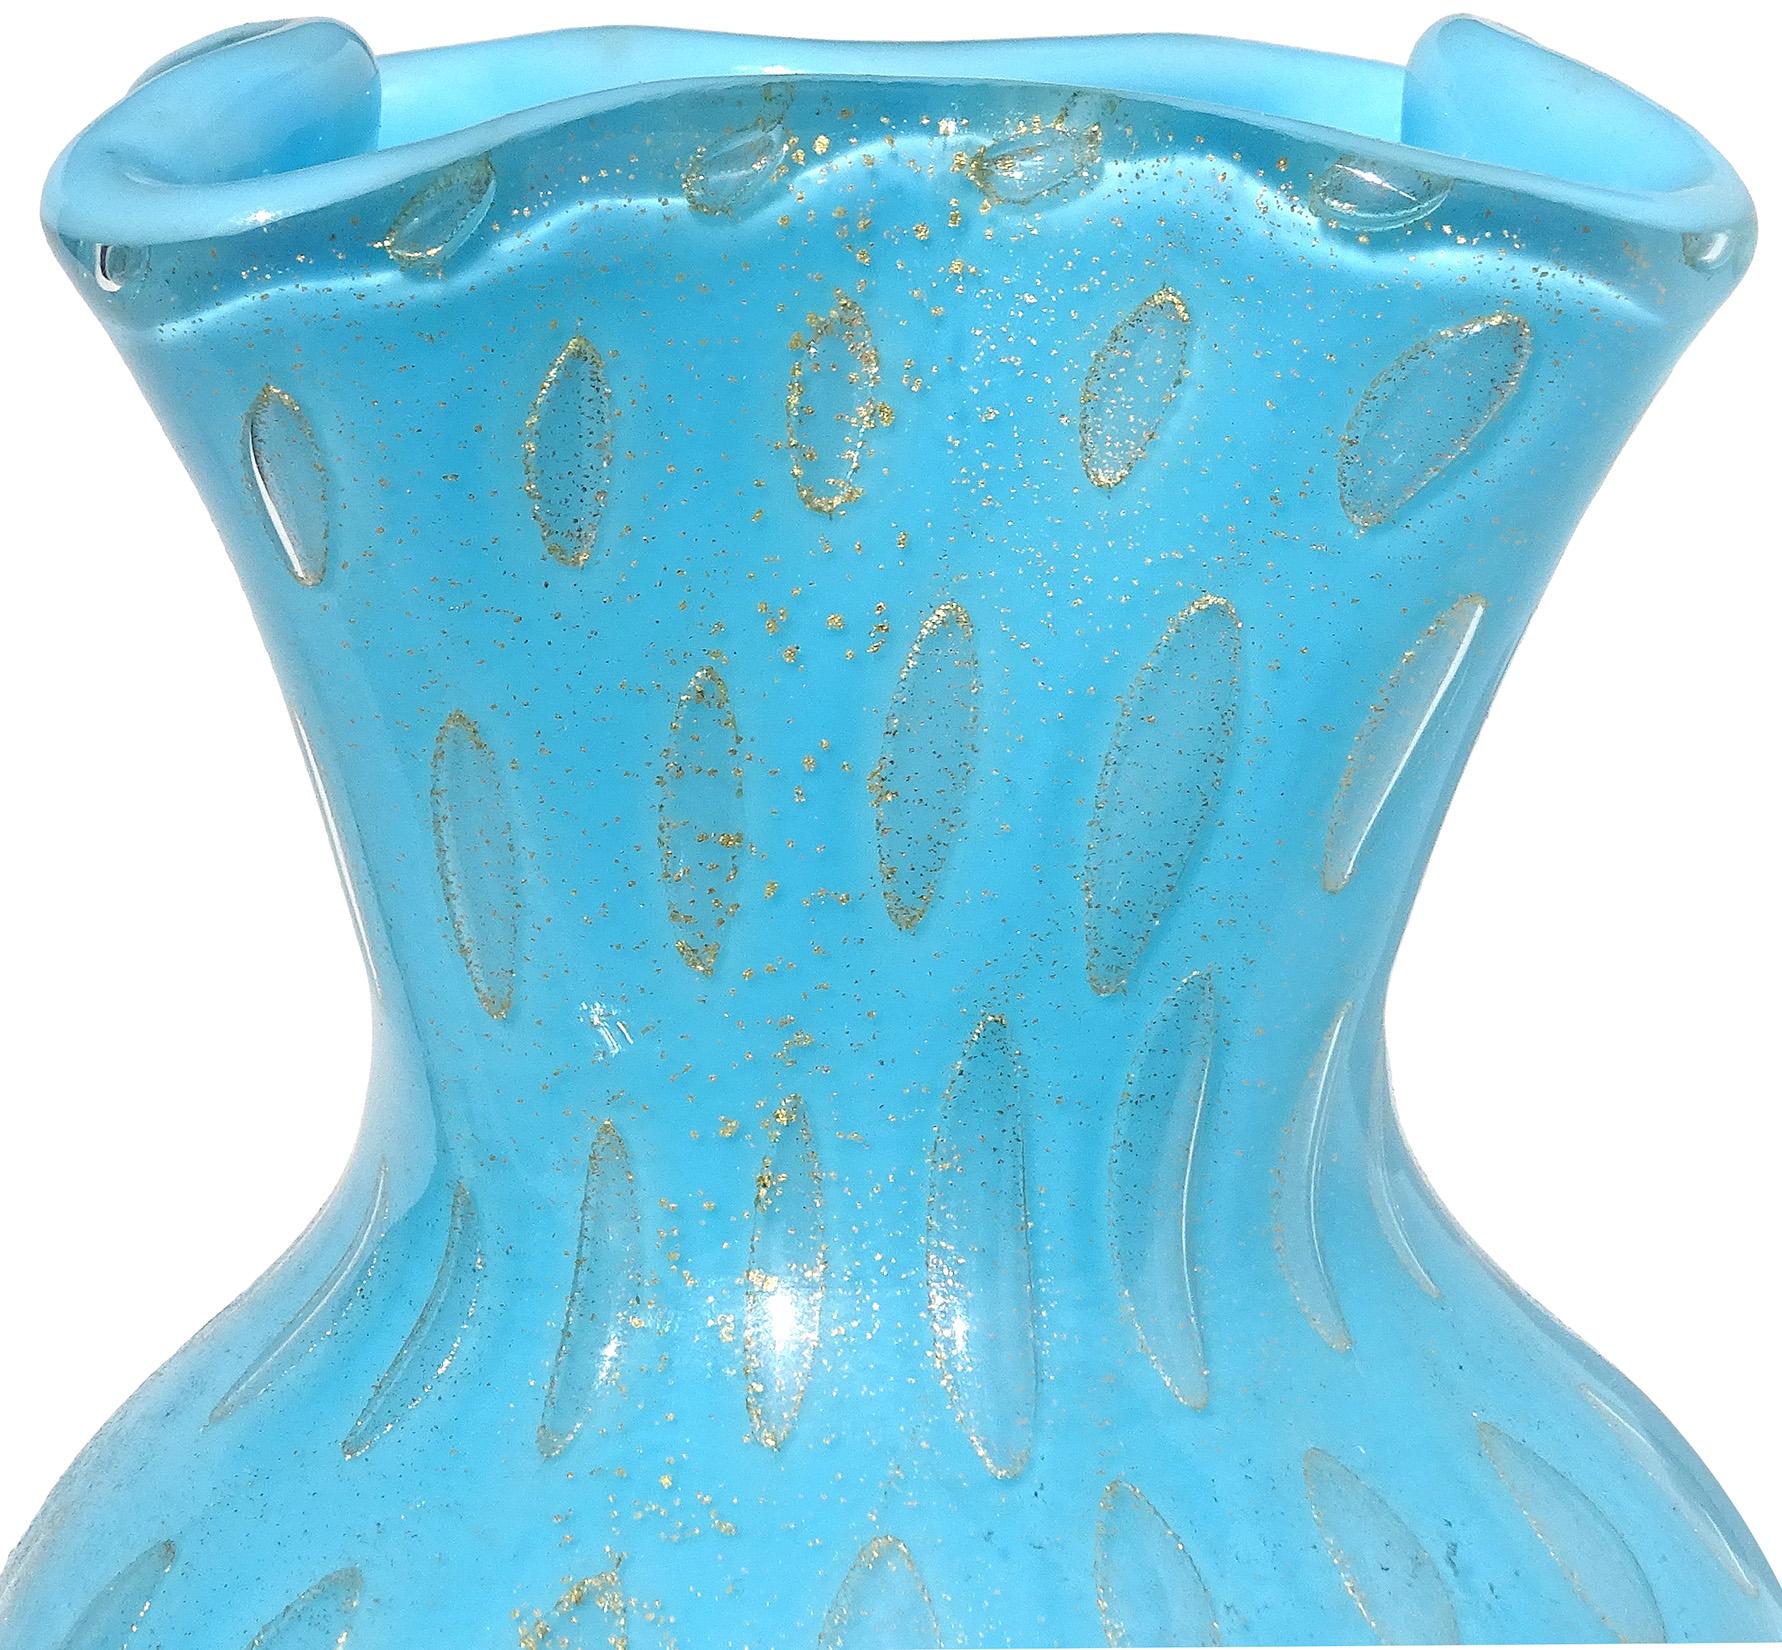 Beautiful vintage Murano hand blown blue gold flecks and controlled bubbles Italian art glass decorative flower vase. Documented to designer Alfredo Barbini, circa 1950-1960. The vase has a rectangular rim, with pinched decorative folds and round